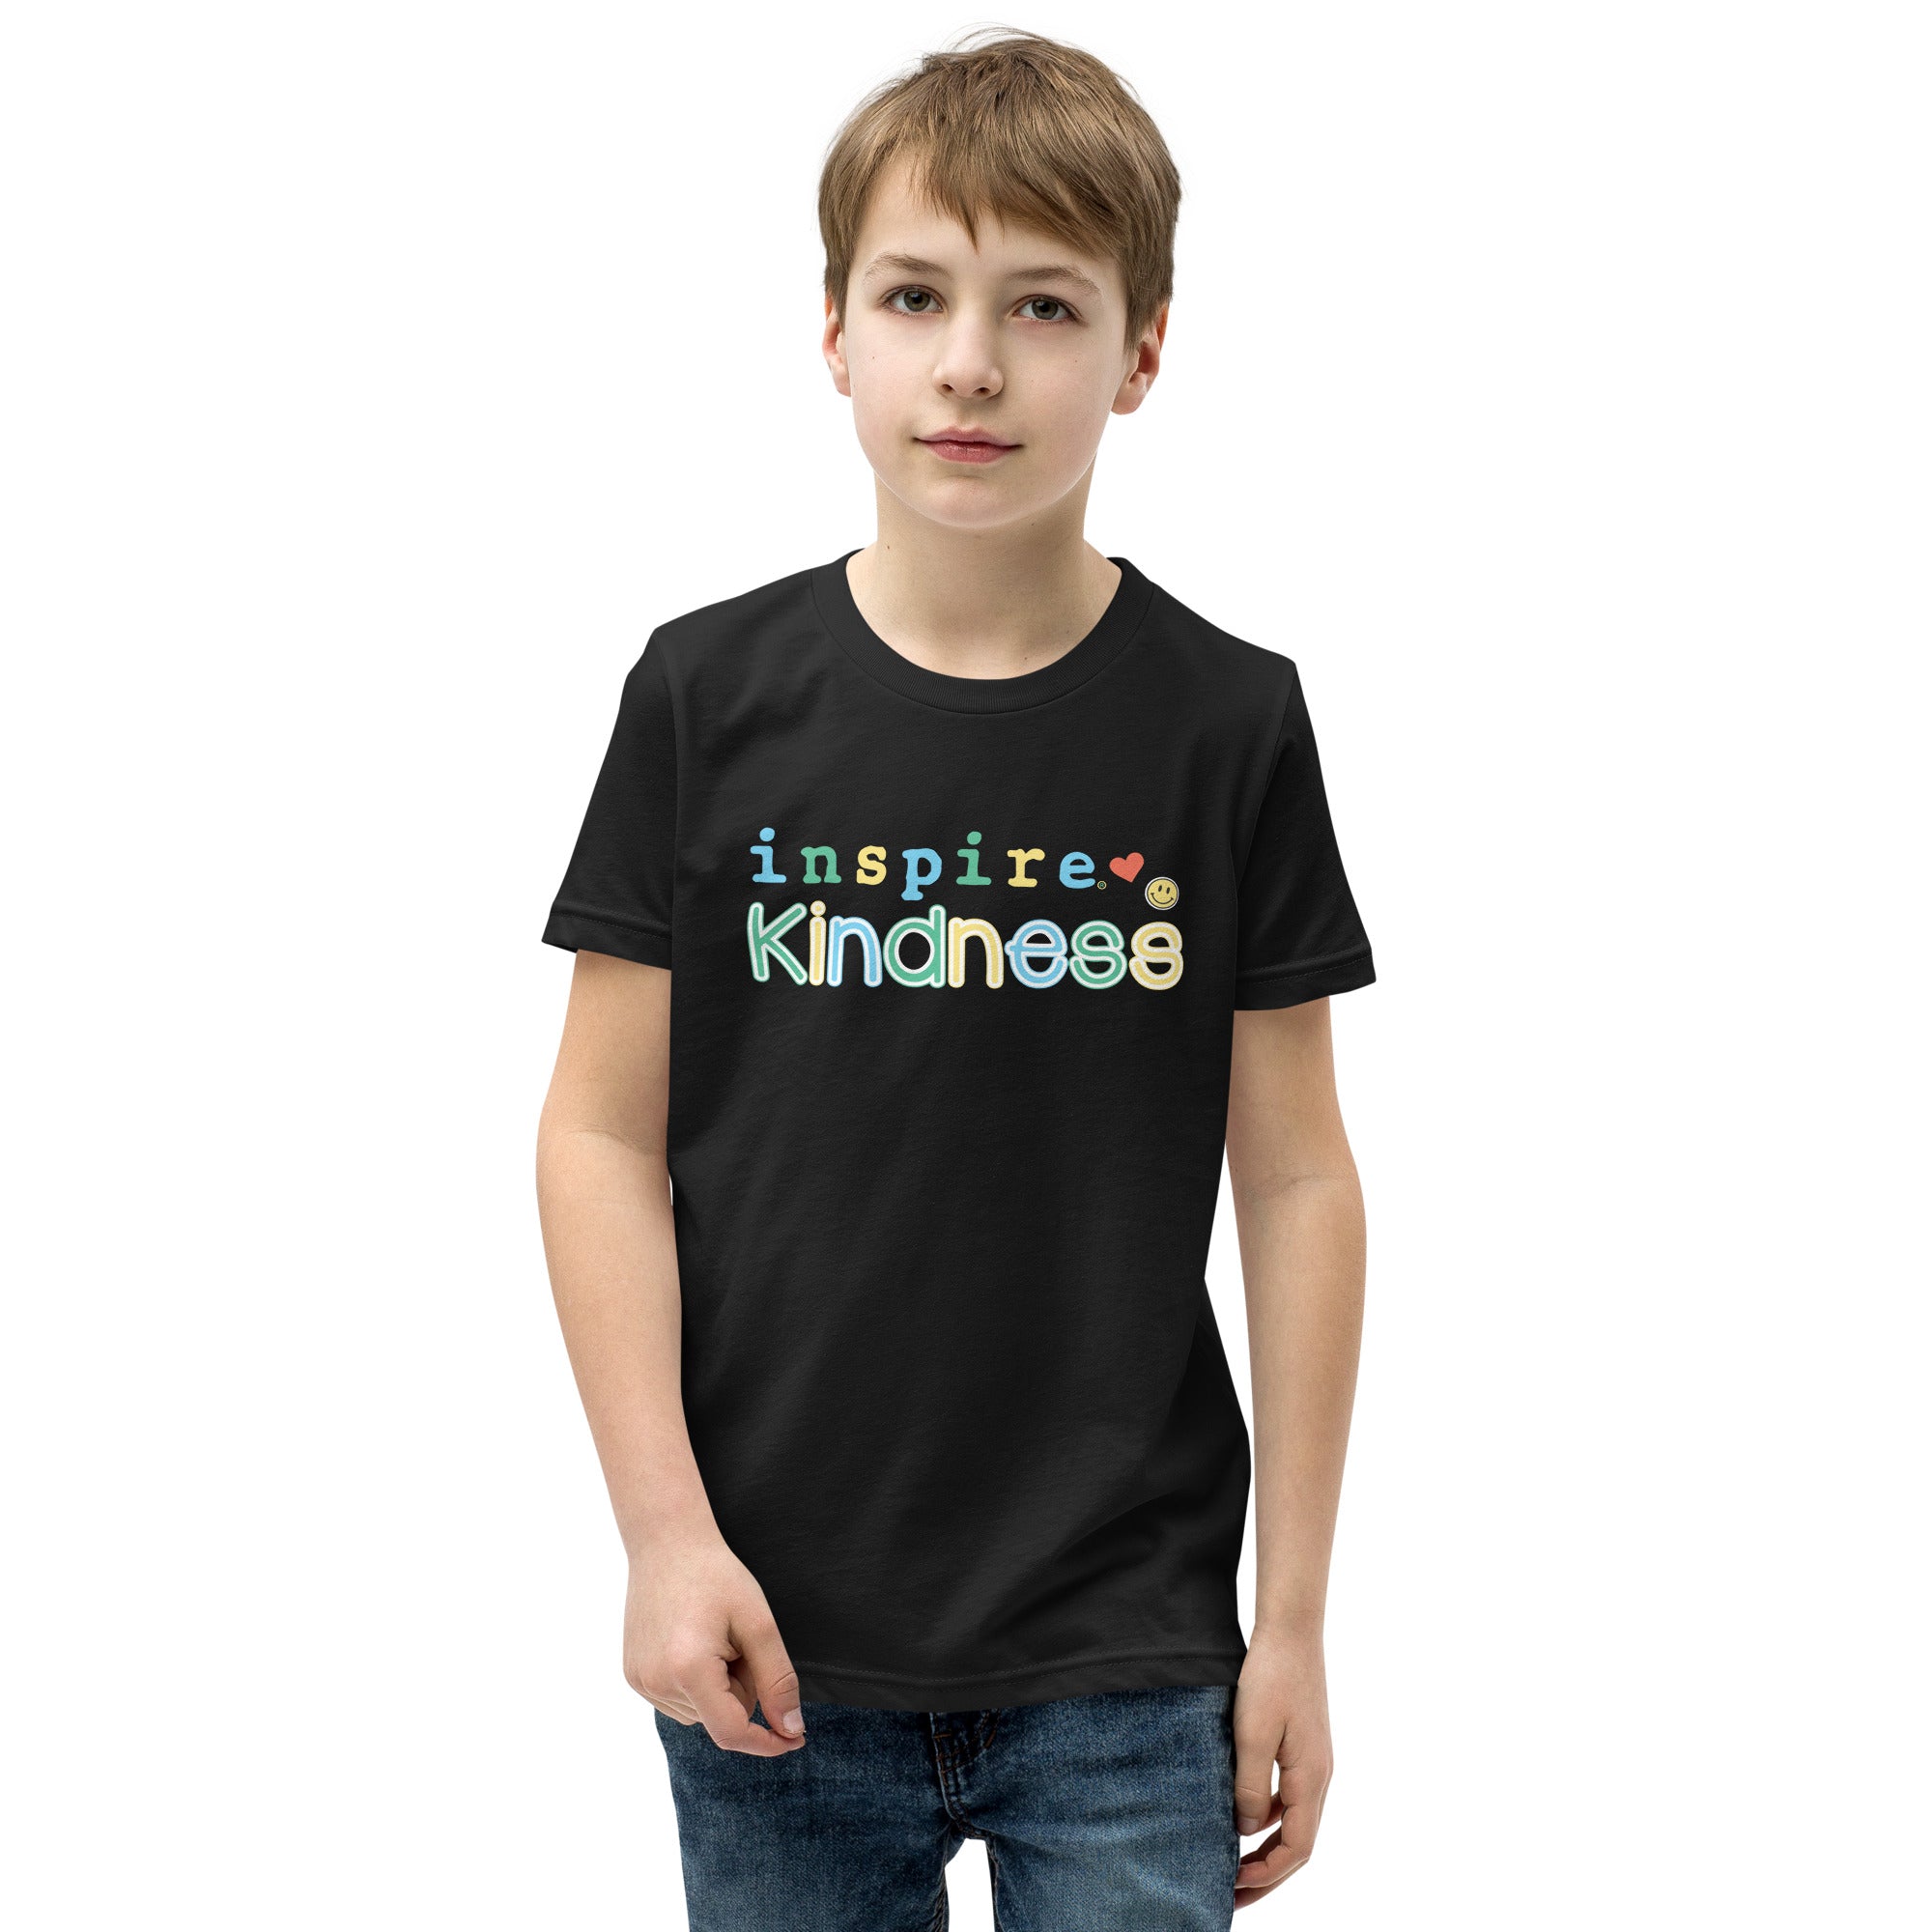 inspire Kindness Youth Short Sleeve T-Shirt